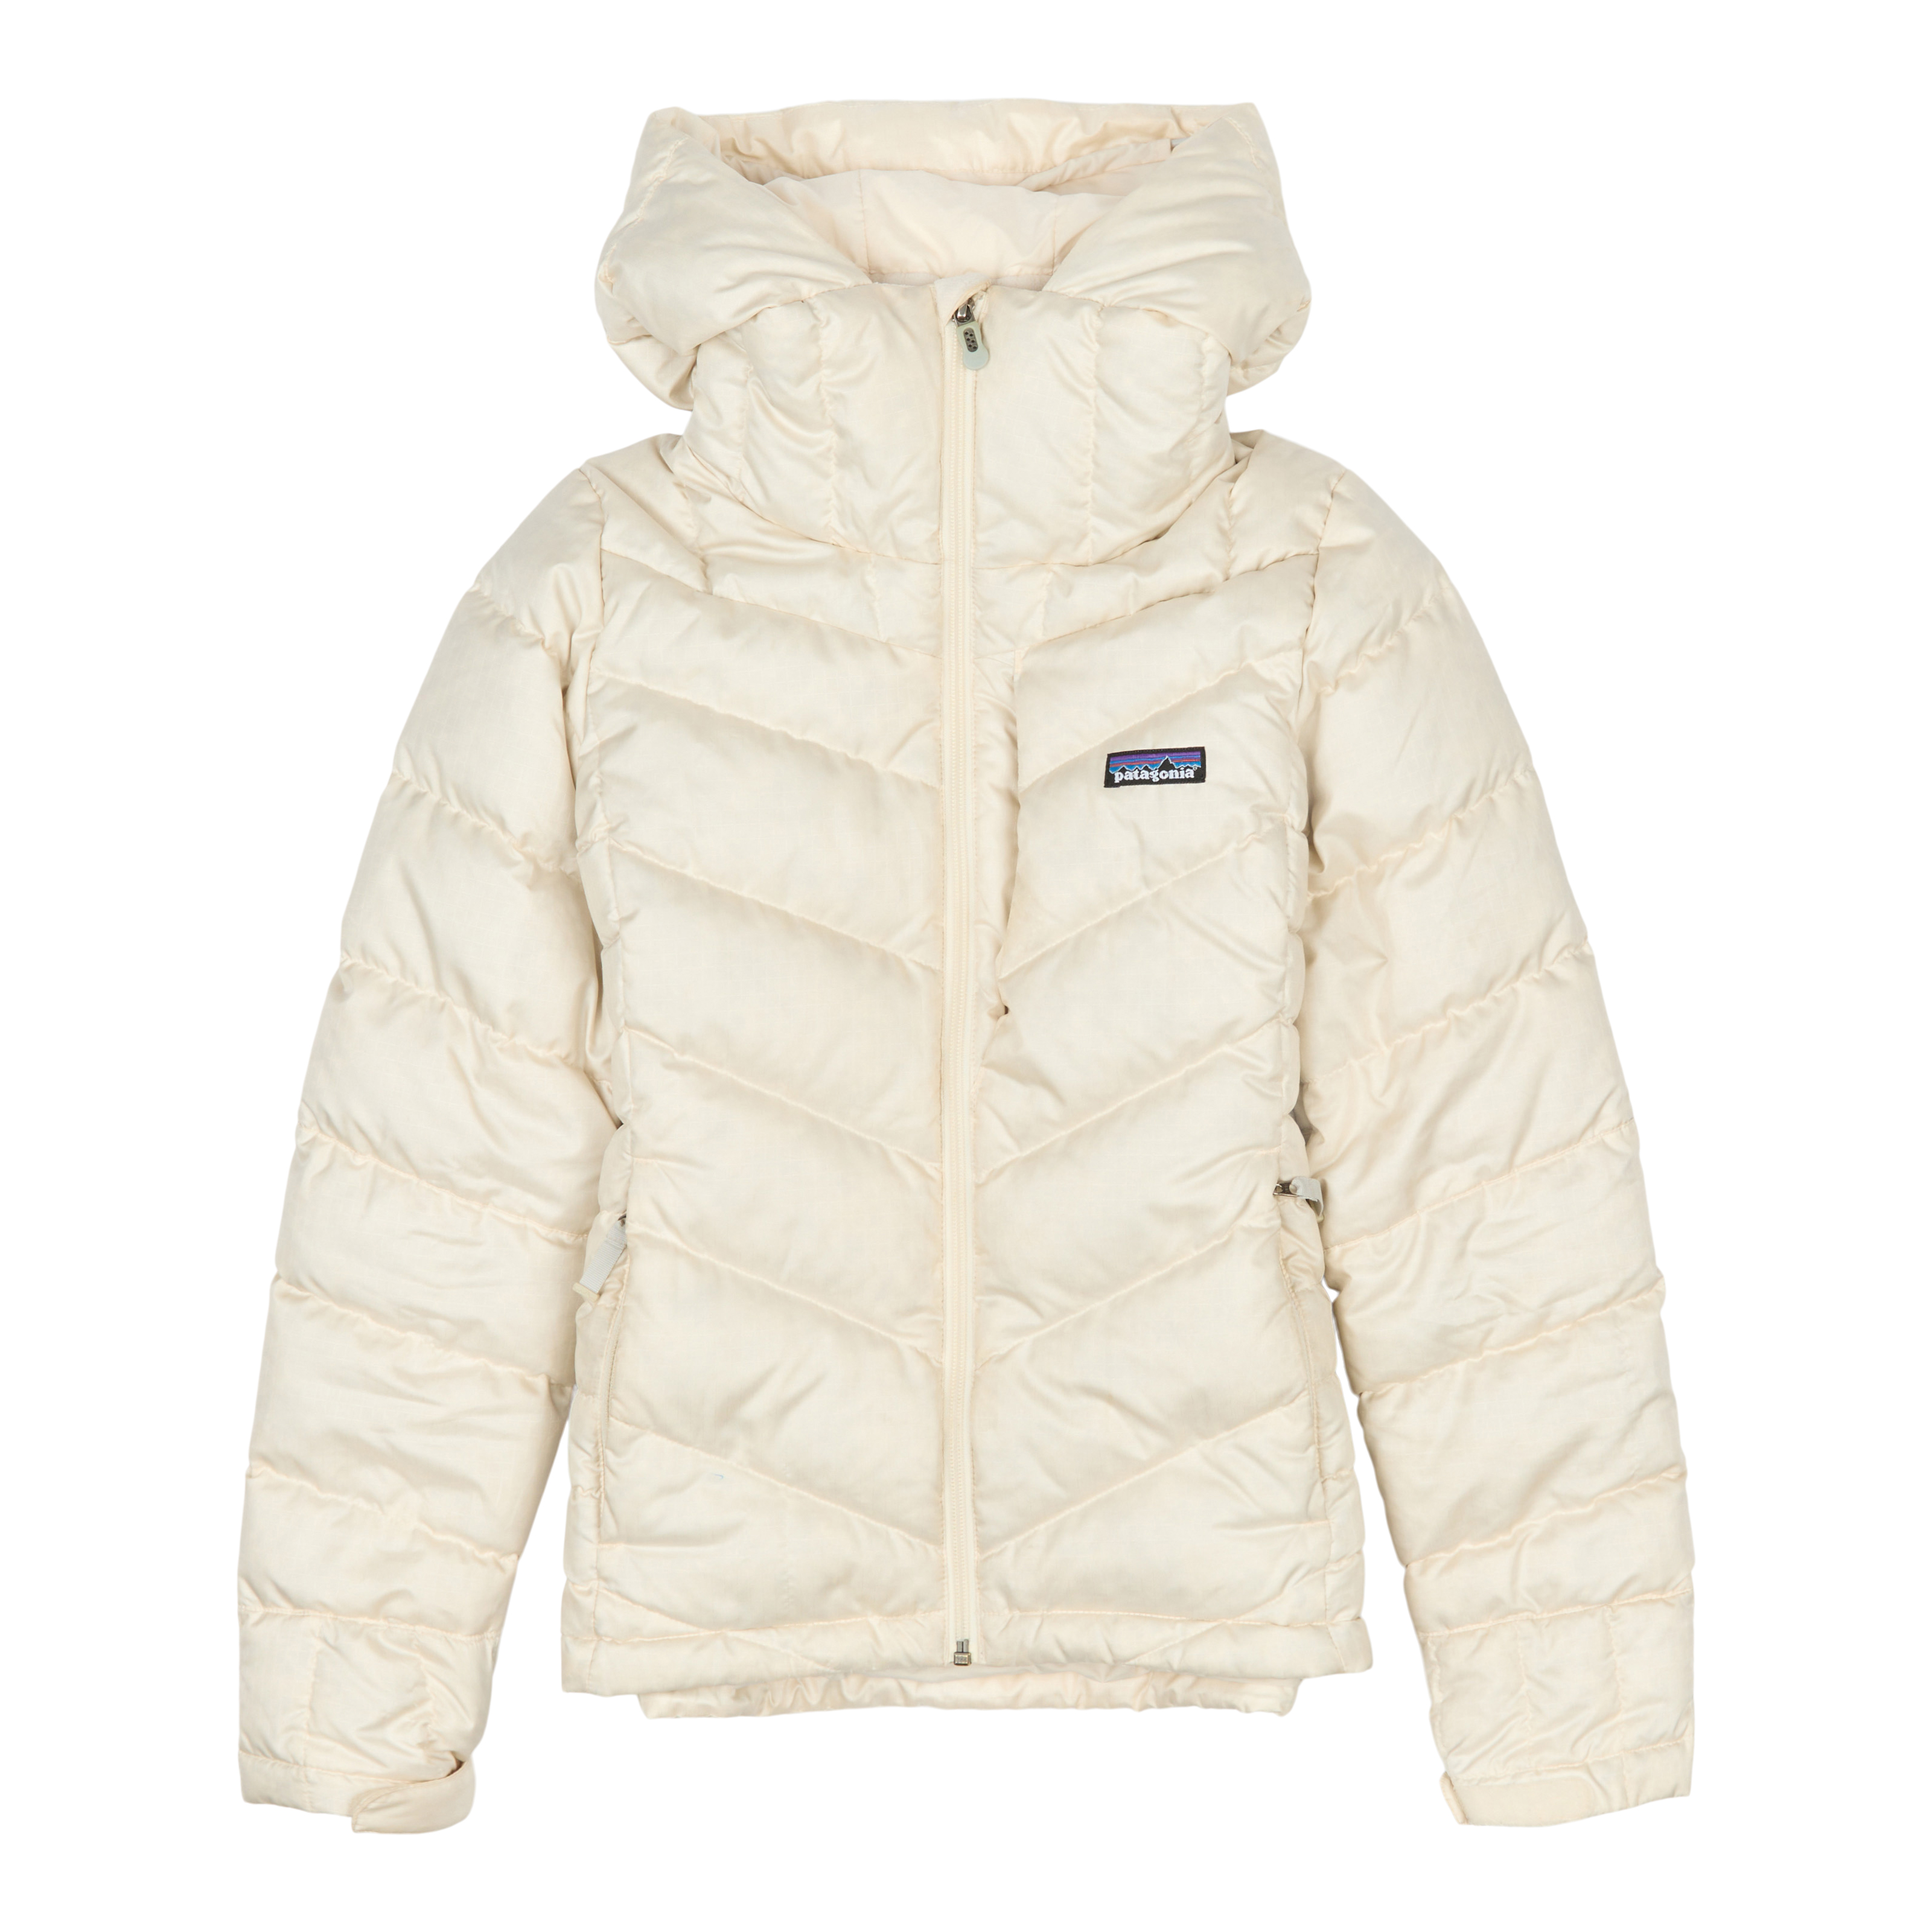 US Patagonia W's PIPE DOWN JKT W'S S